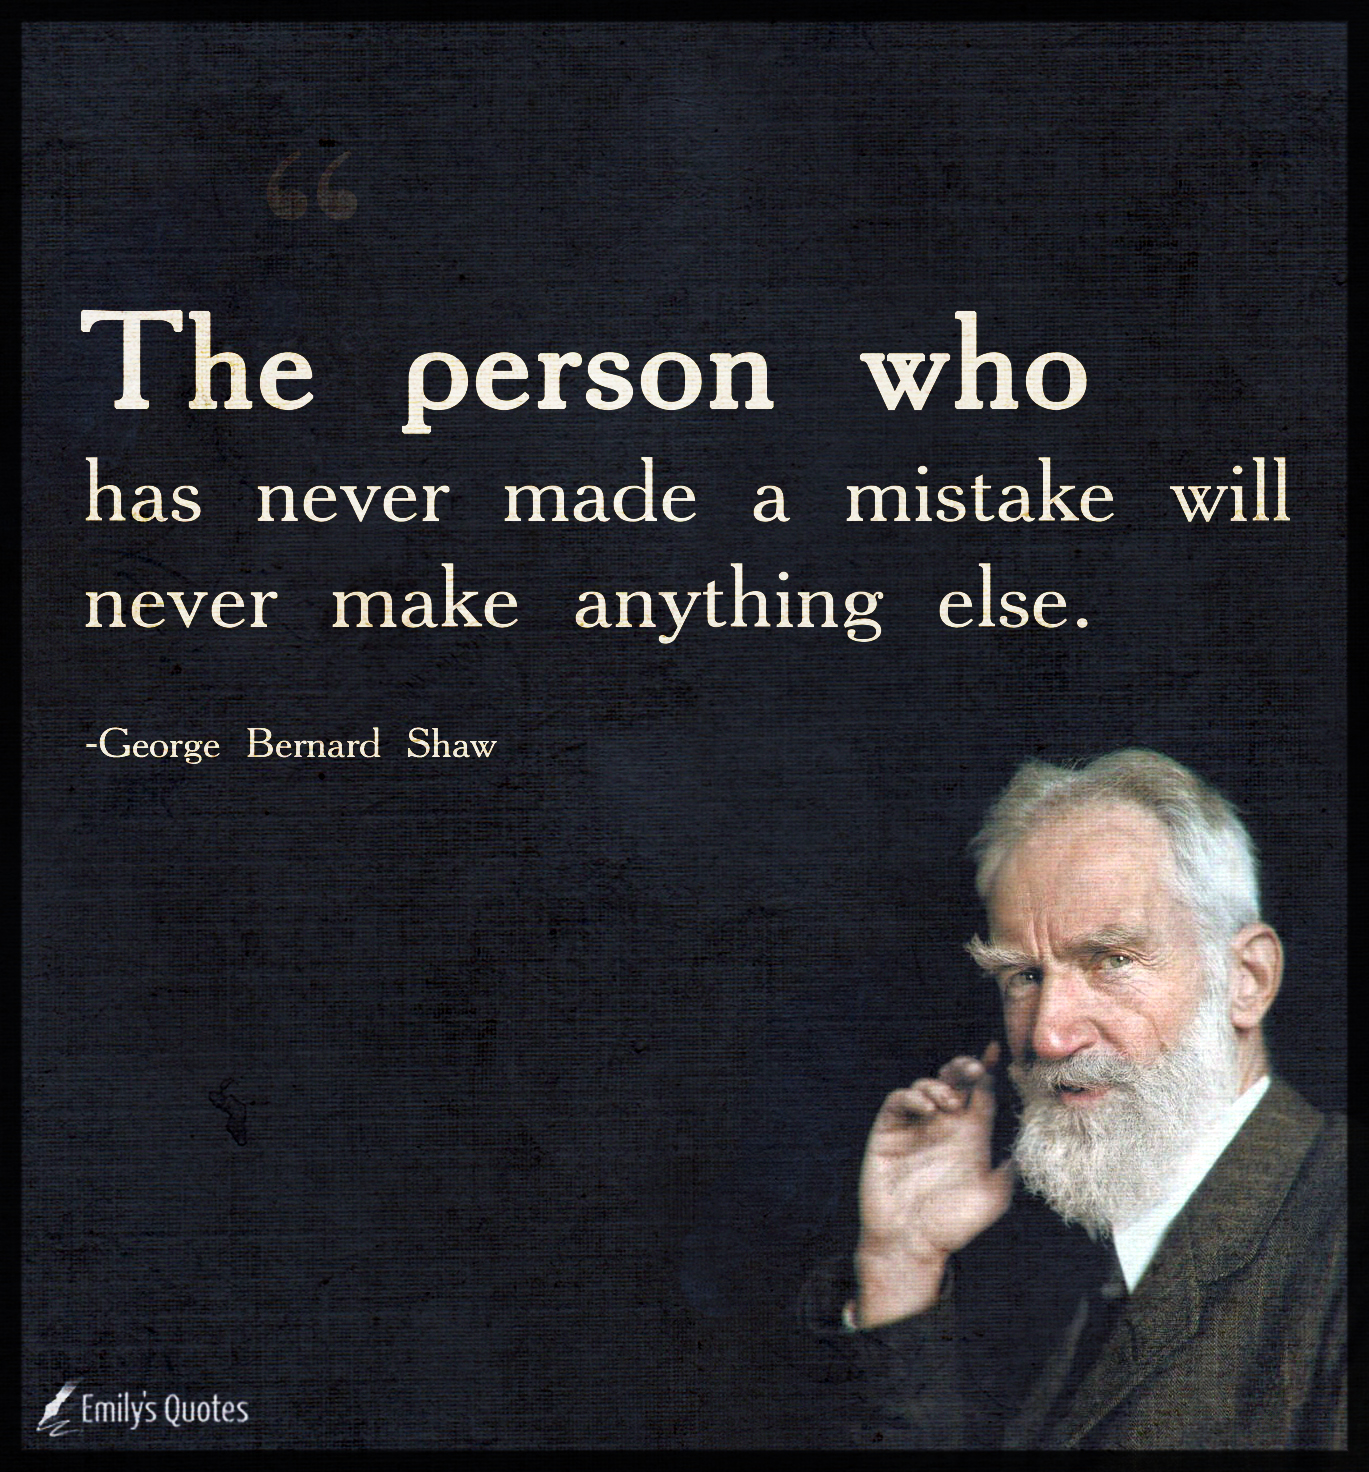 The person who has never made a mistake will never make anything else